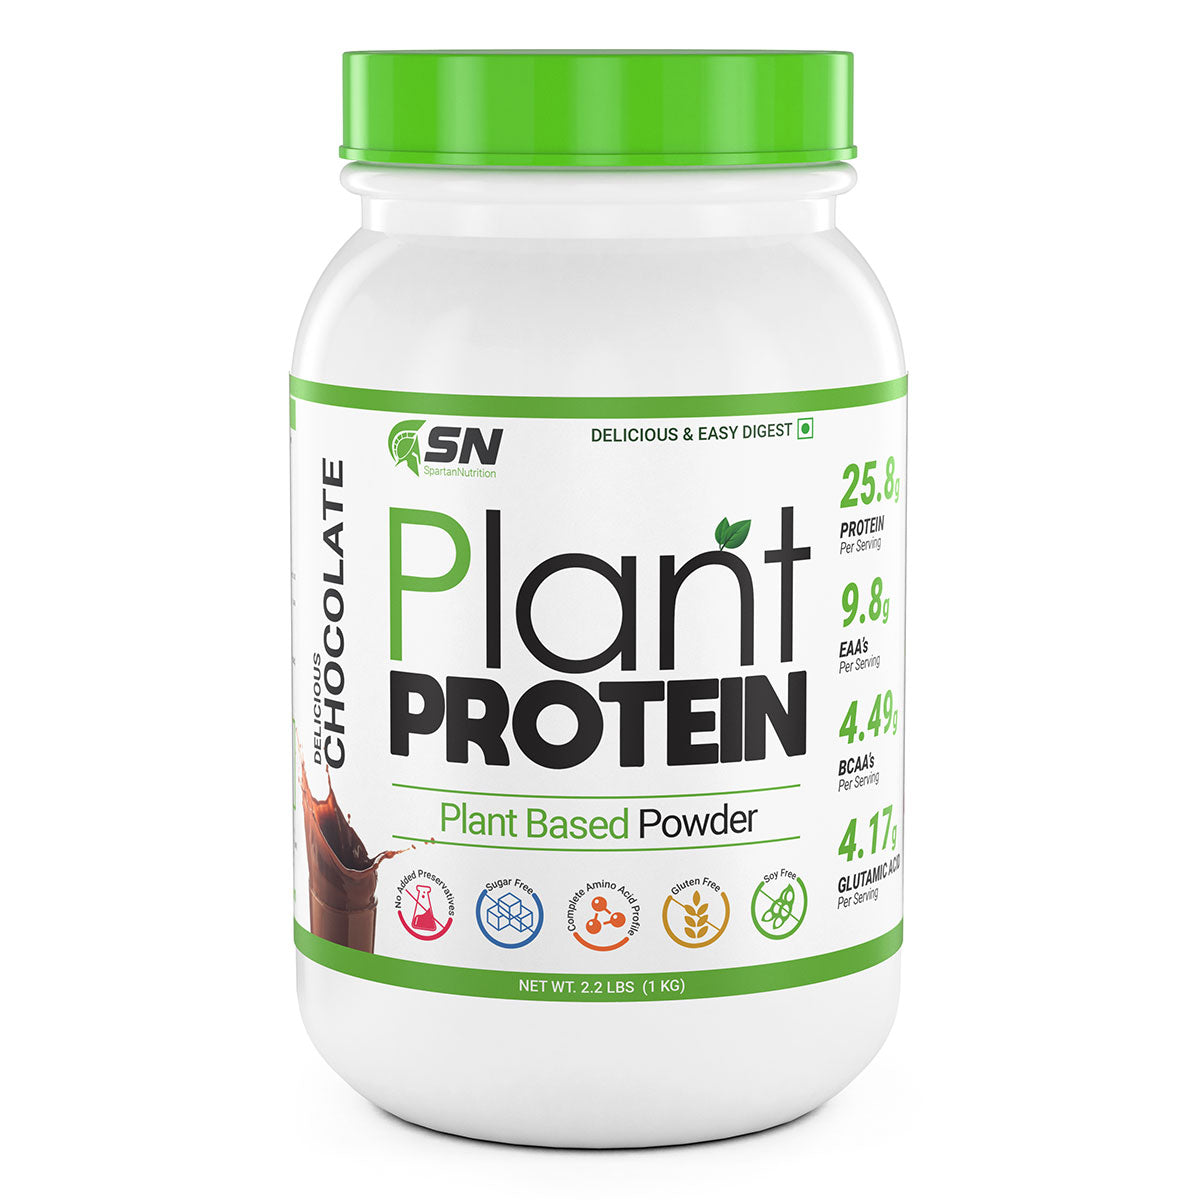 PLANT PROTEIN IMMUNE BOOSTER